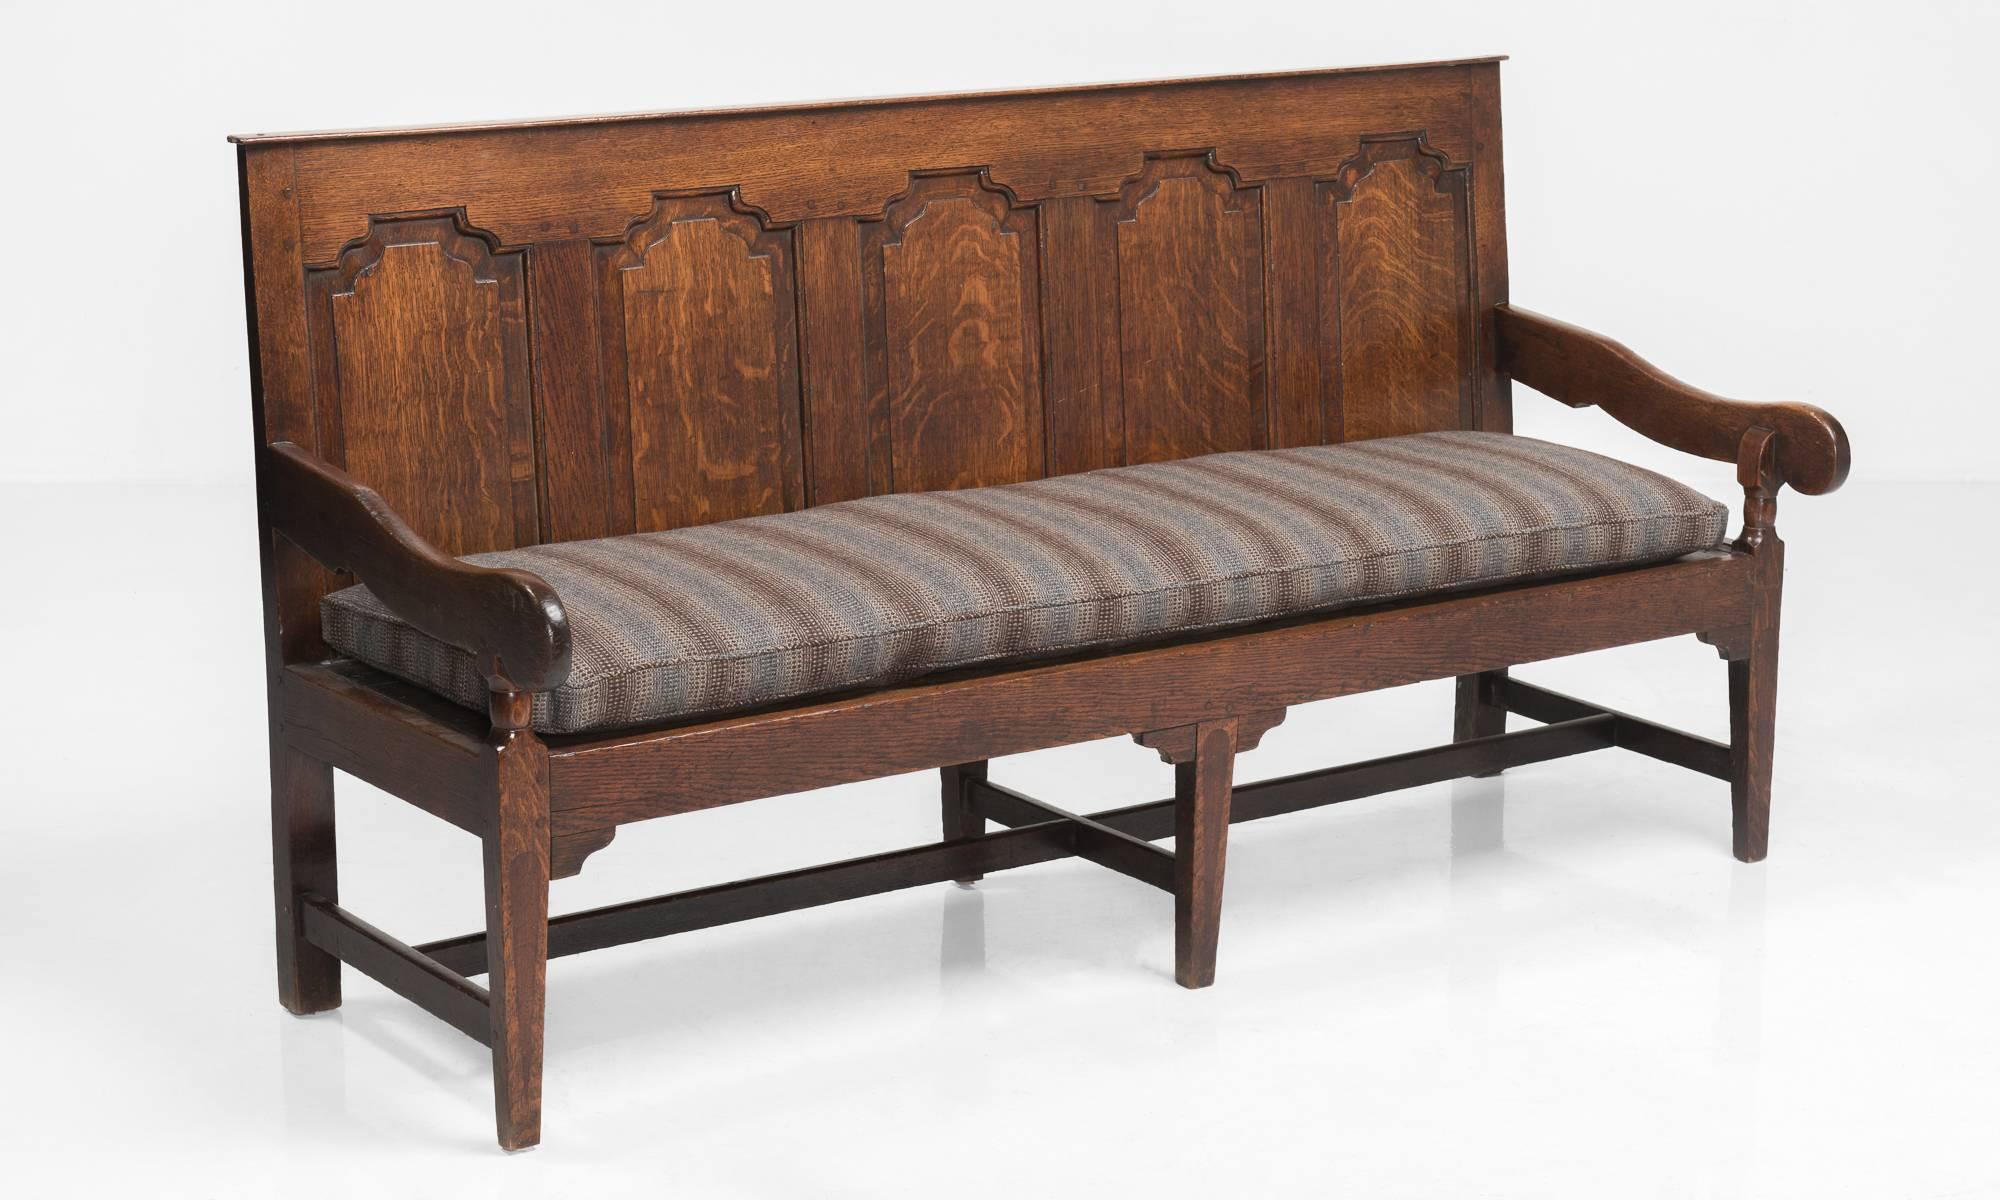 Georgian oak settle, Made in England, circa 1780.

Handsome oak bench with shaped and raised panels to the back. Each leg is inlaid with a mahogany panel on the front face. Long cushion upholstered in Maharam wool.